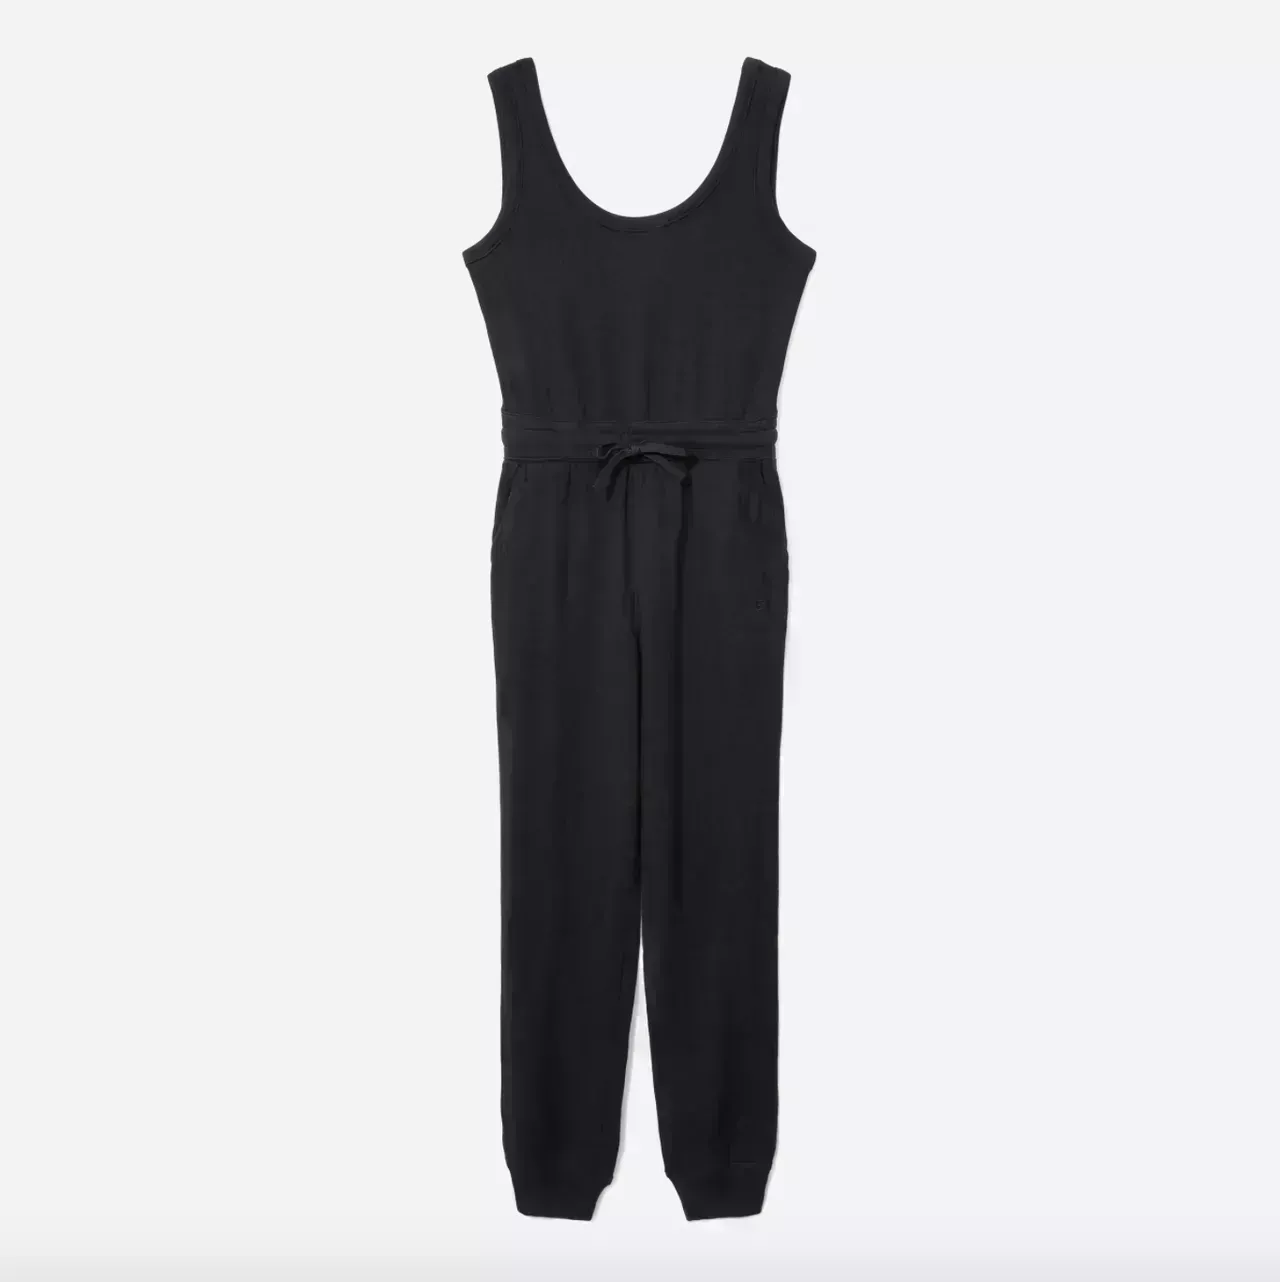 A black Everlane The French Terry Jumpsuit on white background